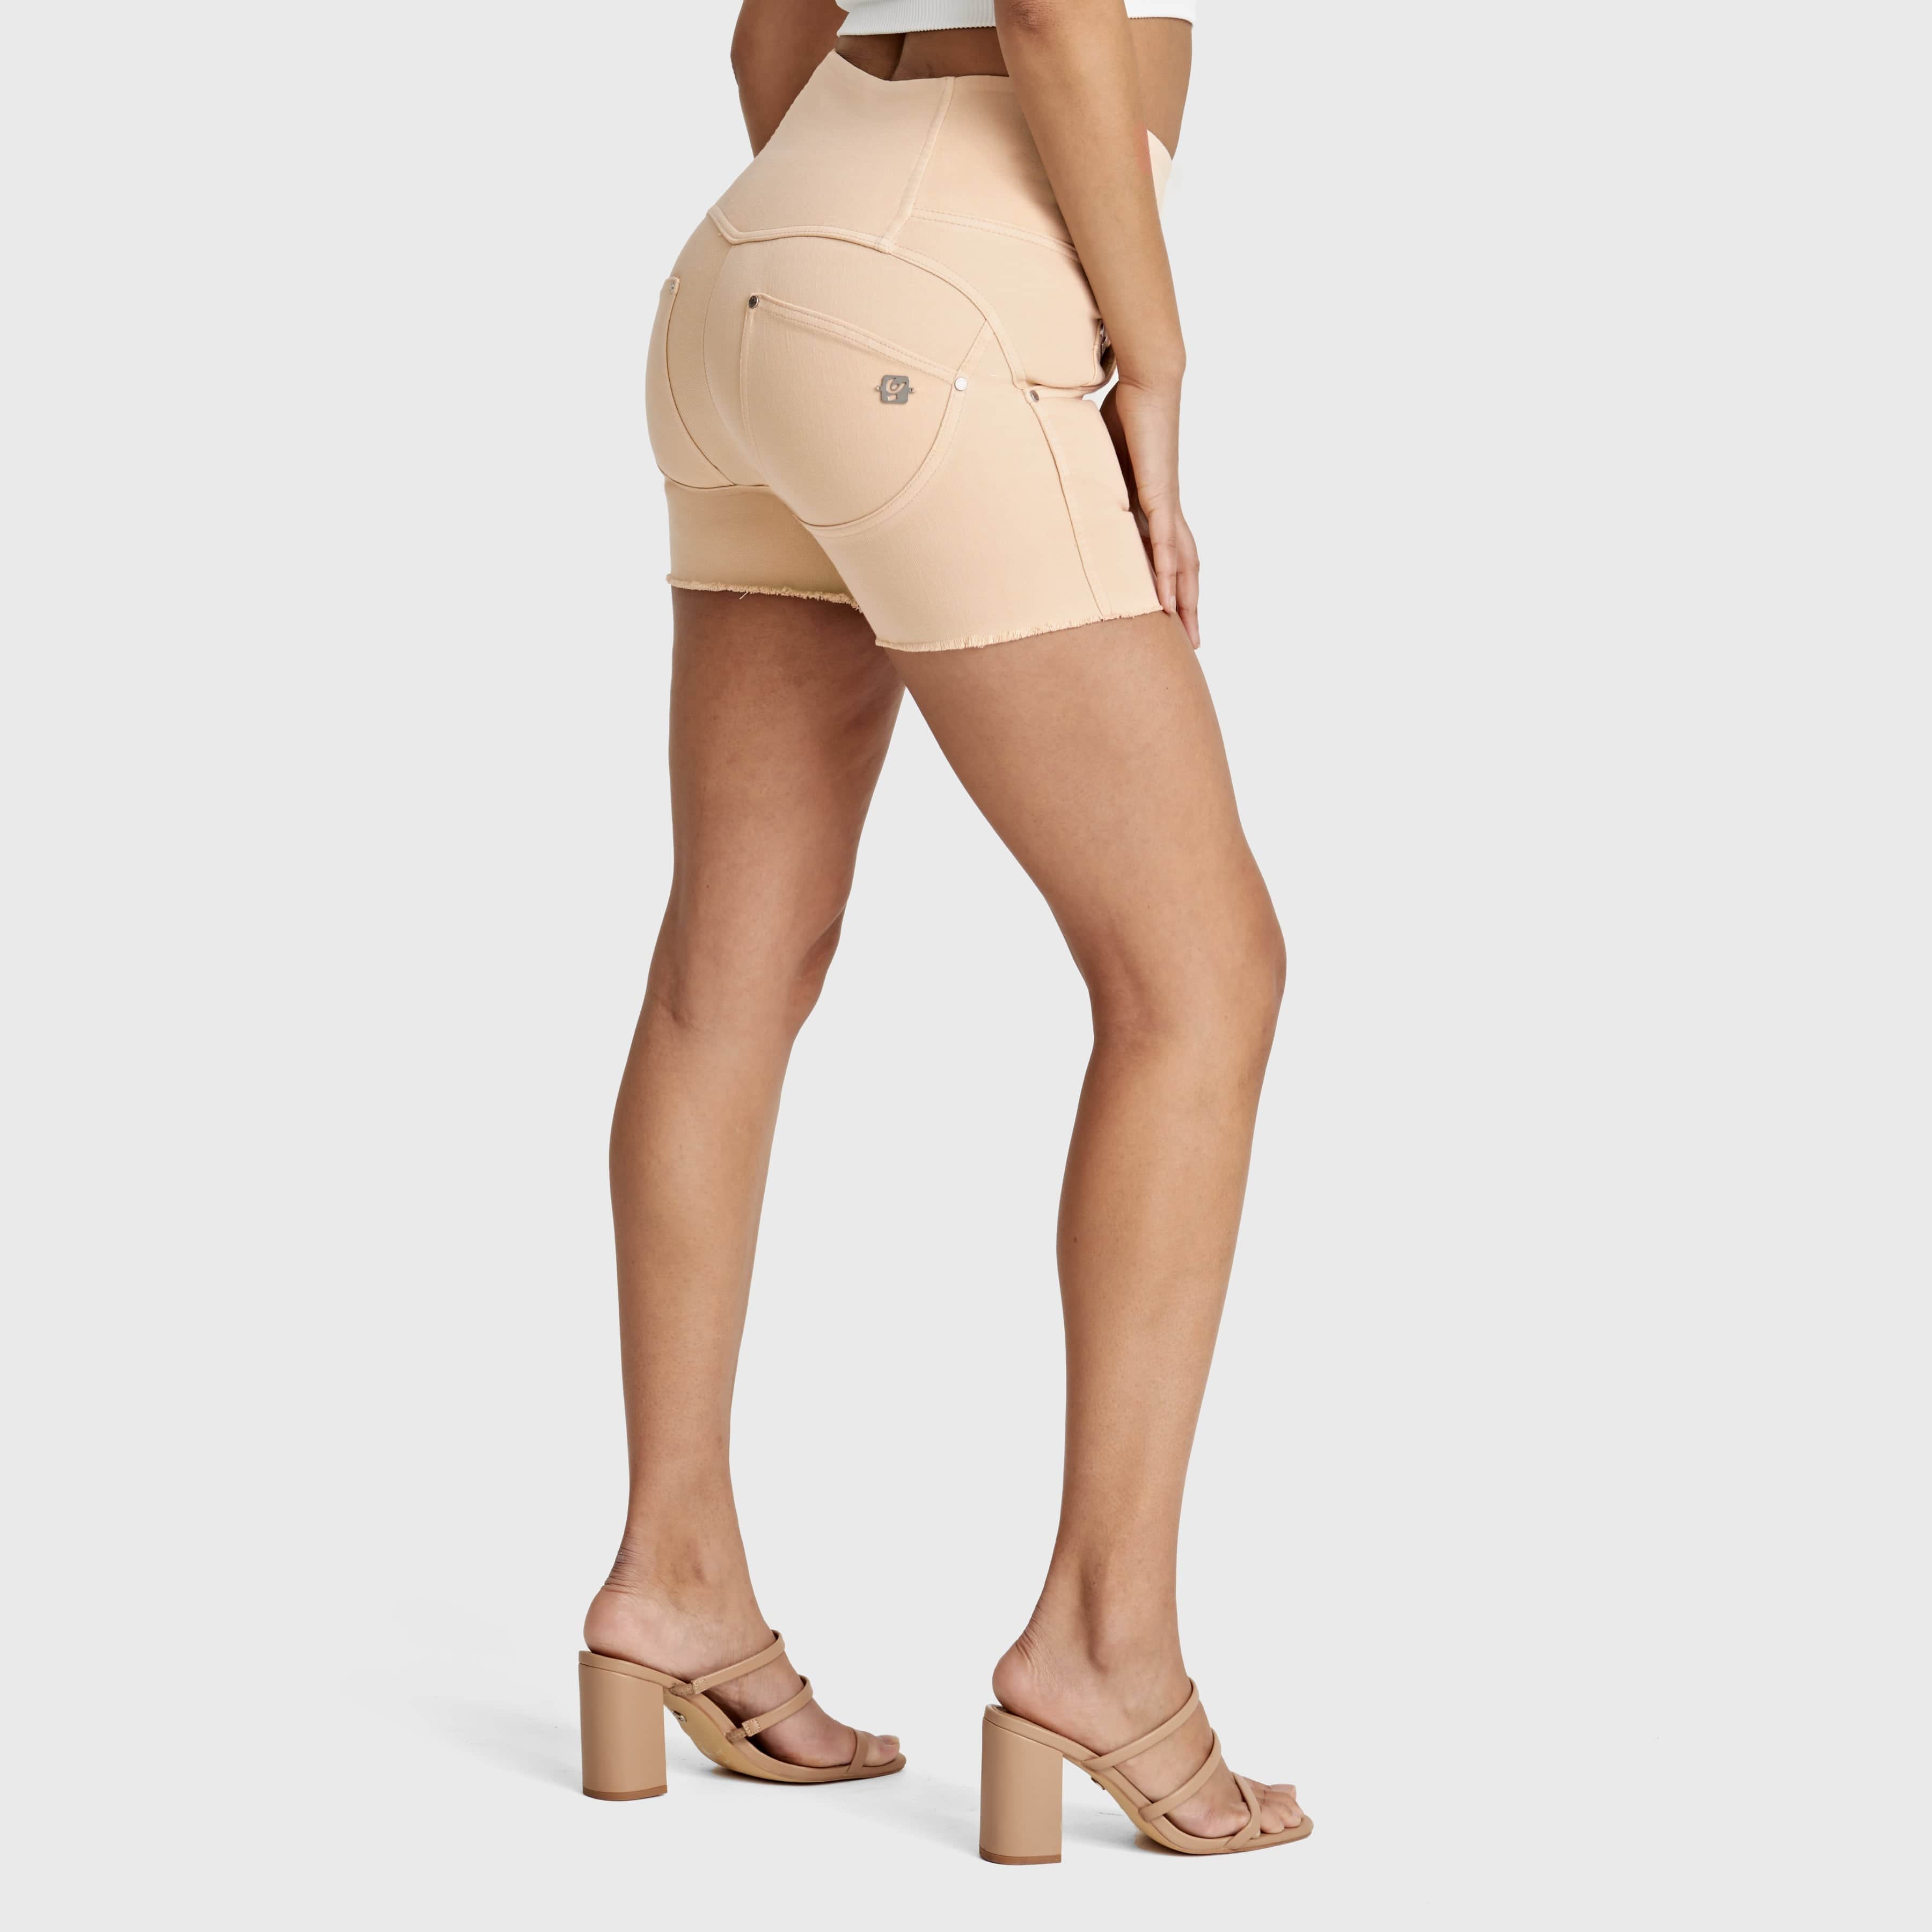 WR.UP® SNUG Jeans - 3 Button High Waisted - Shorts - Beige 2